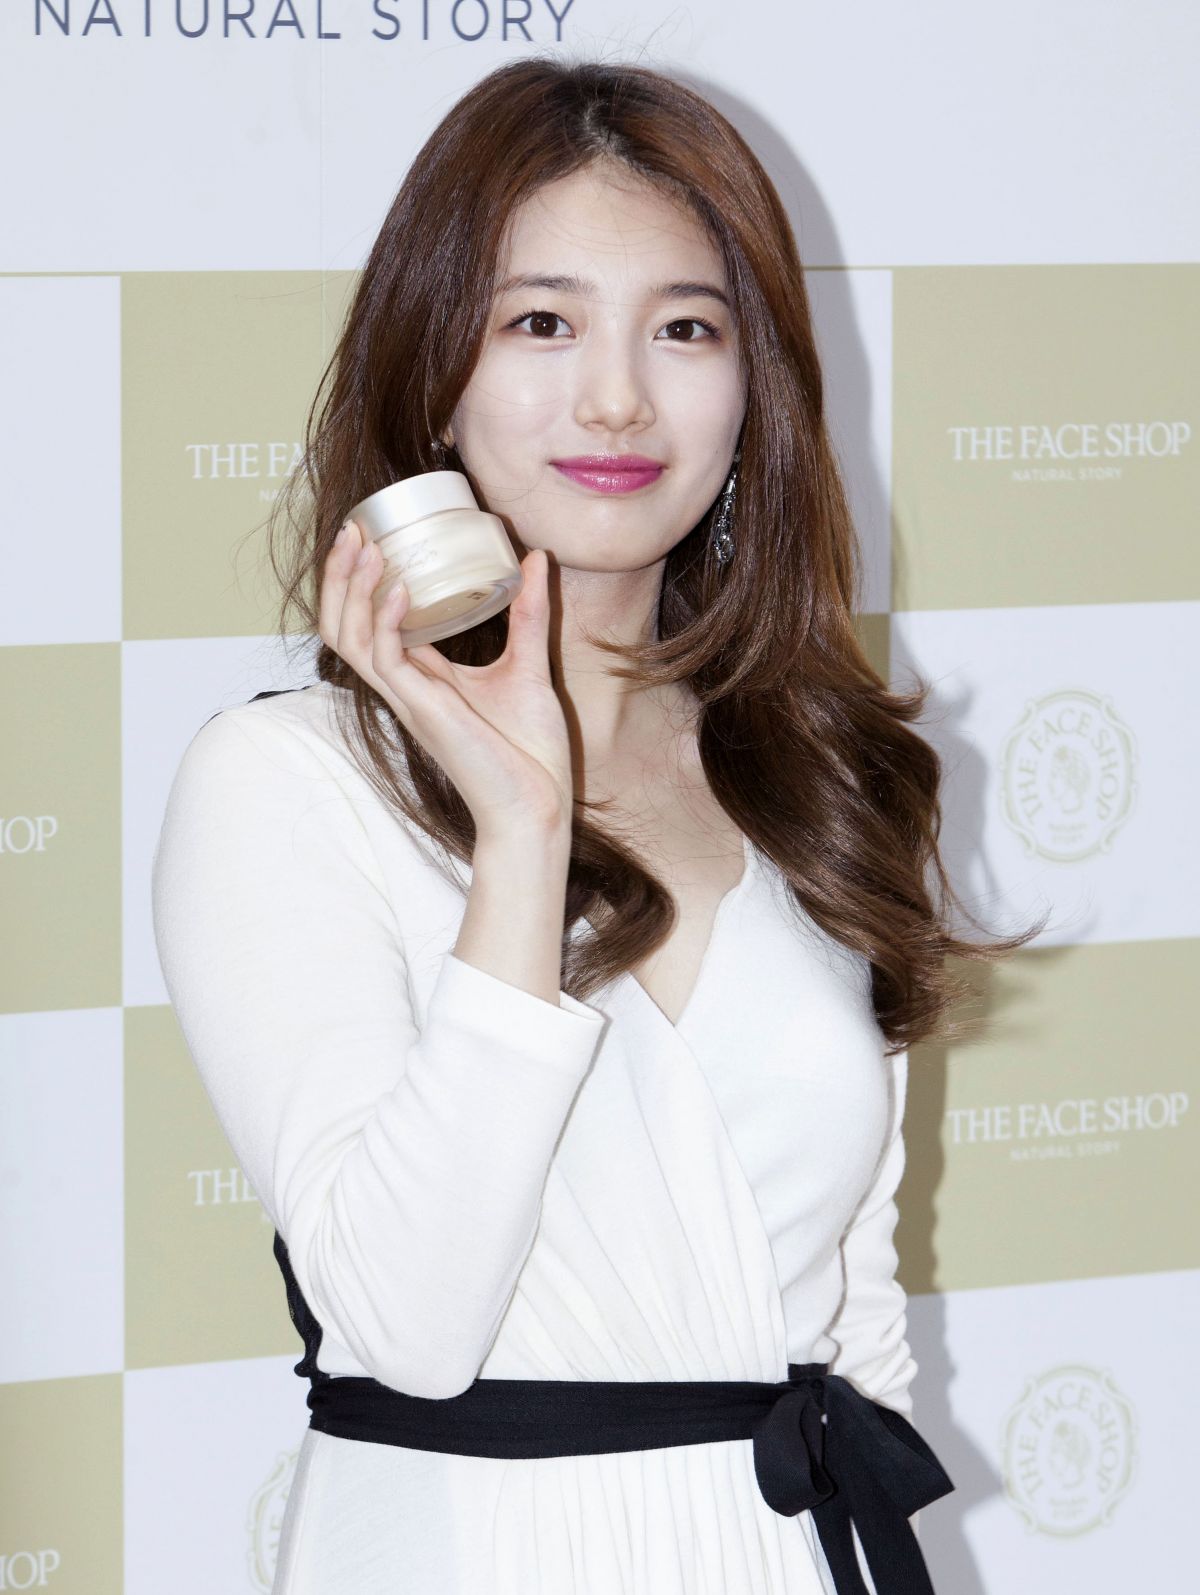 BAE SUZY at The Face Shop Store Photocall in Seoul 09/19/2015 – HawtCelebs